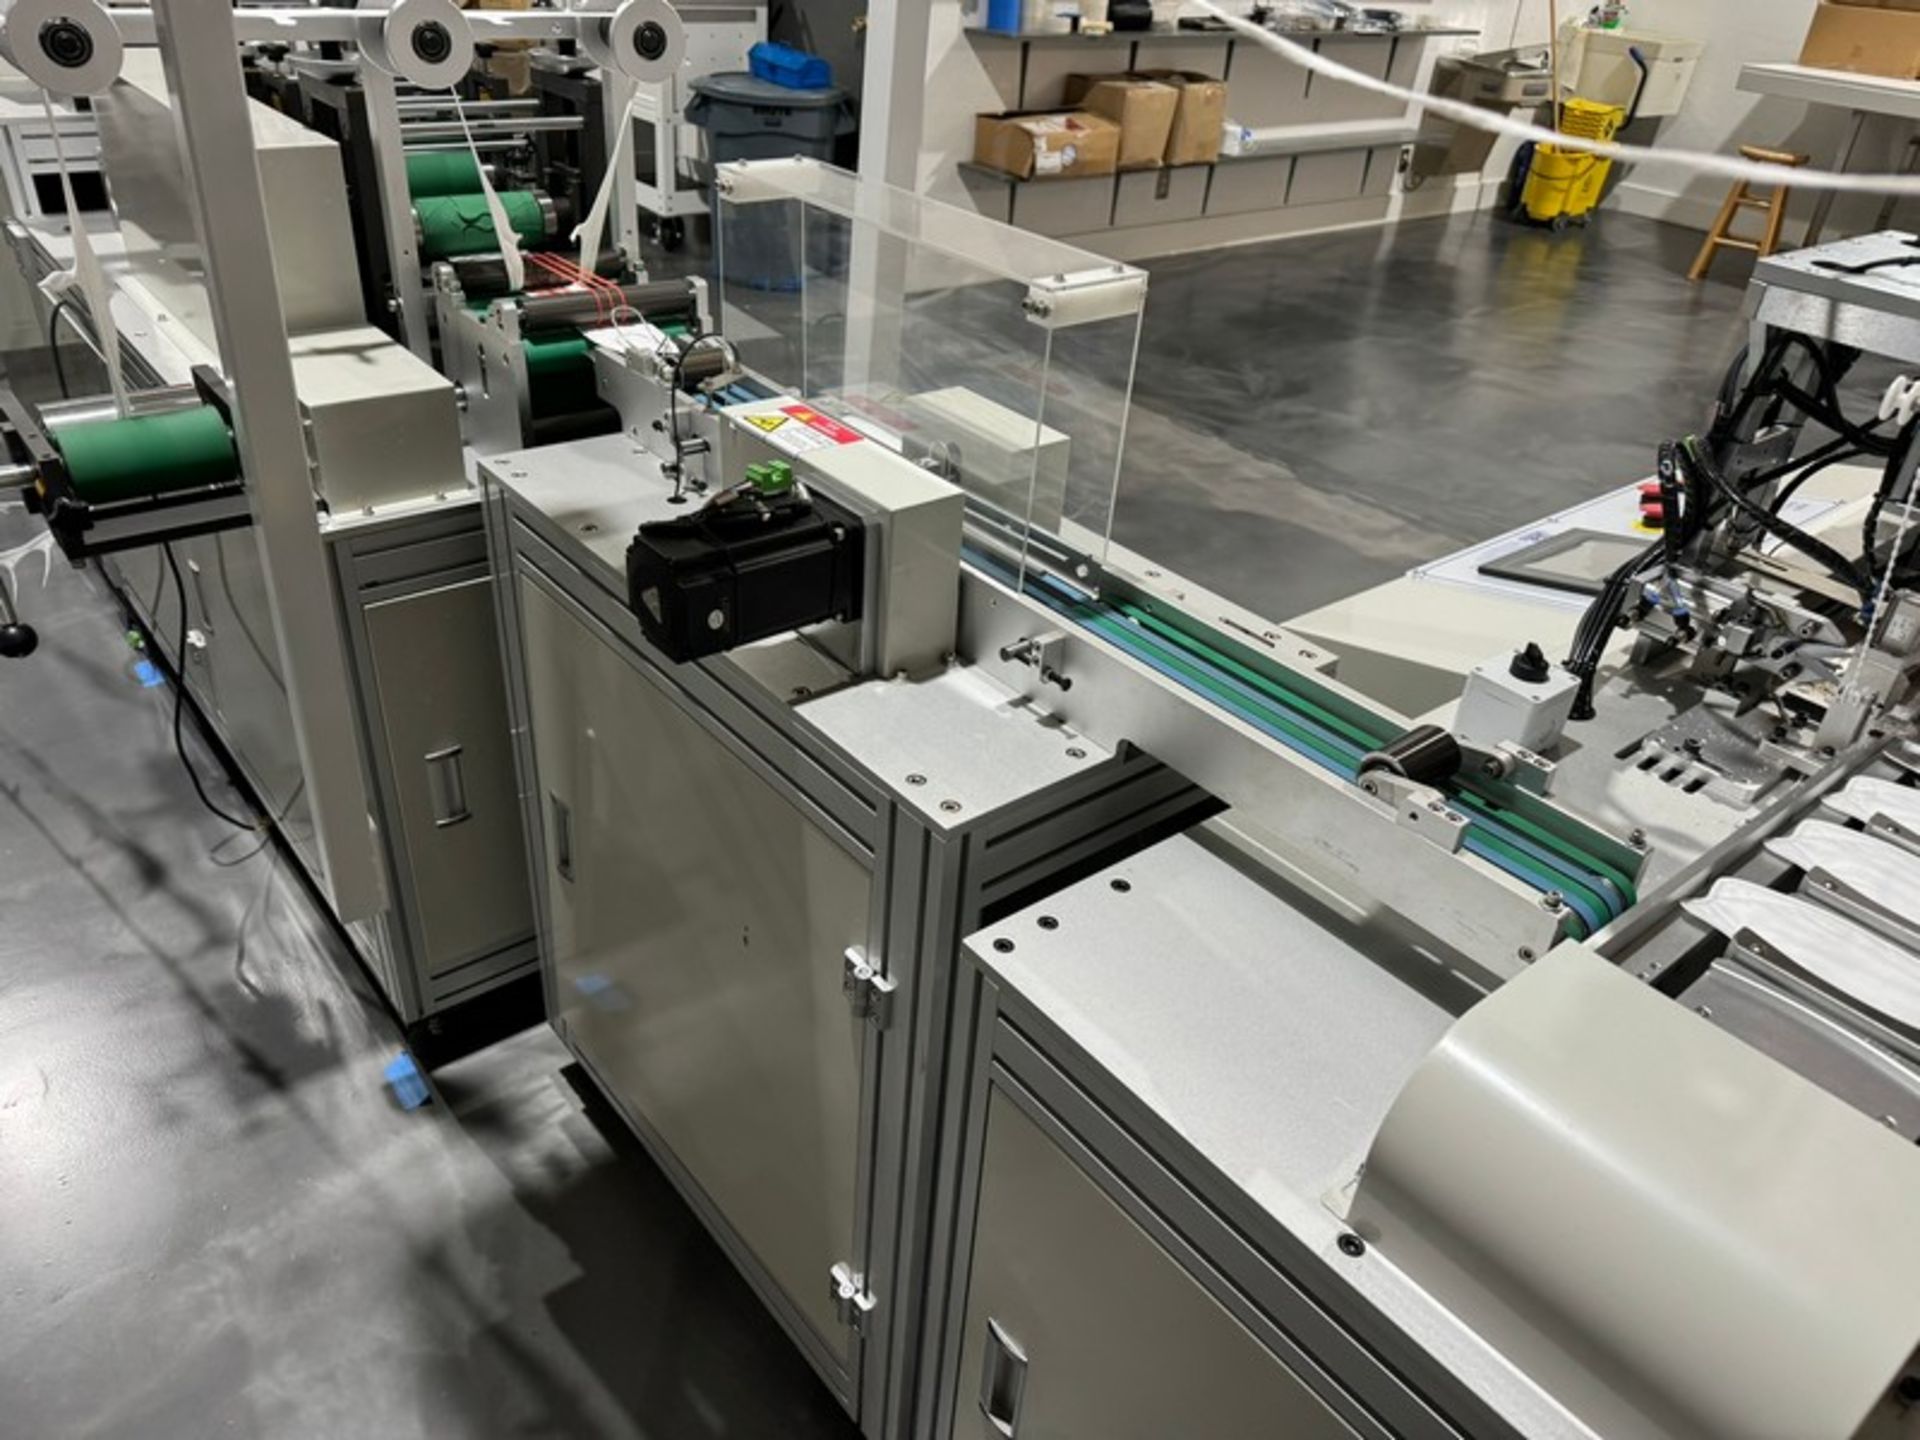 2022 KYD Automatic 6,000 Units Per Hour Mask Manufacturing Line, Includes Unwinding Station, Rolling - Bild 10 aus 30